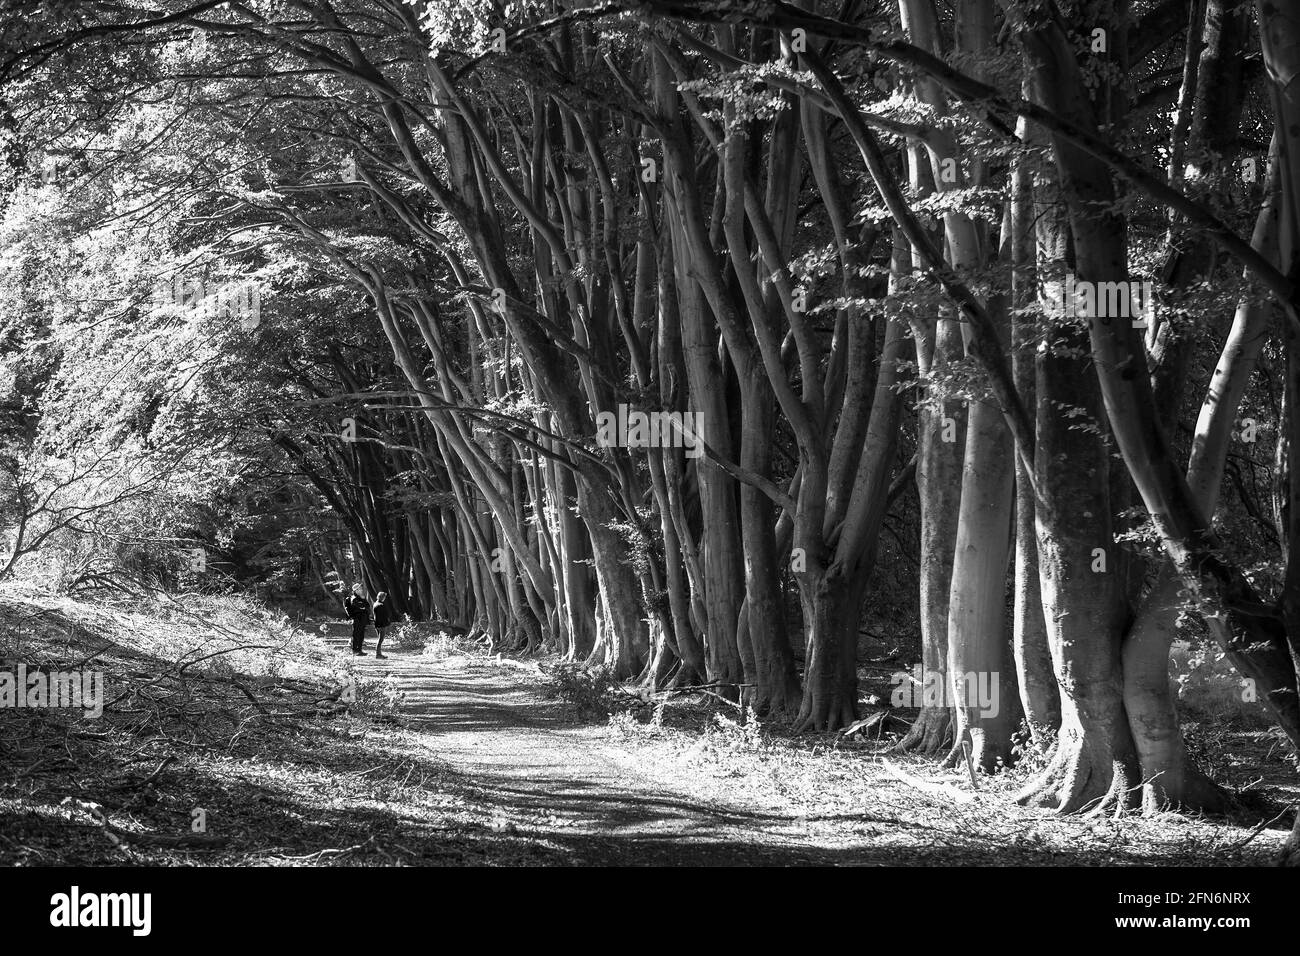 Hikers on a pathway along a beech avenue near Chilgrove, South Downs National Park, West Sussex, England, UK.  Black and white version. MODEL RELEASED Stock Photo